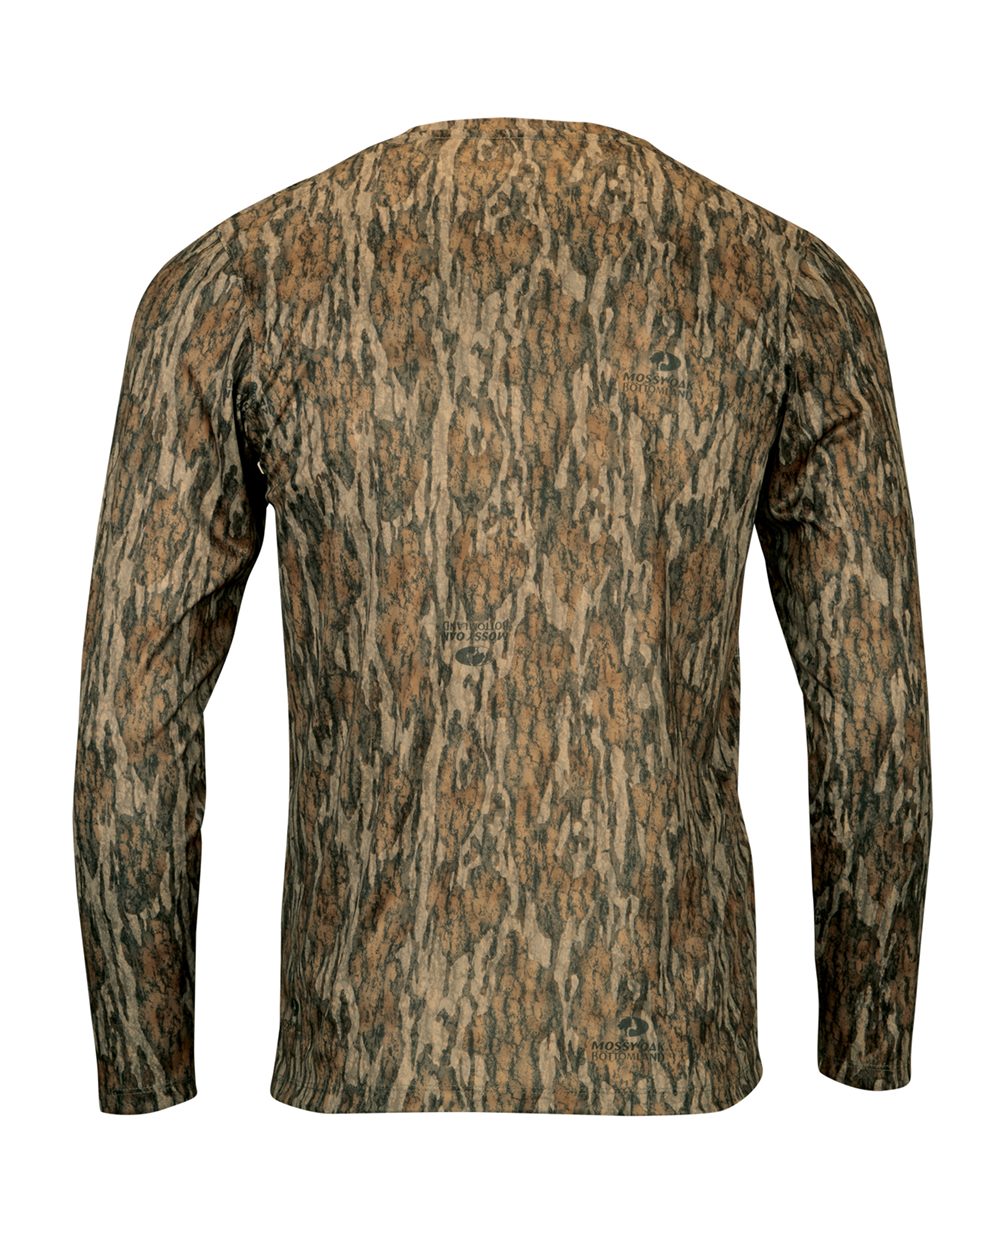 Mossy Oak Brown Athletic Long Sleeve Shirts for Men